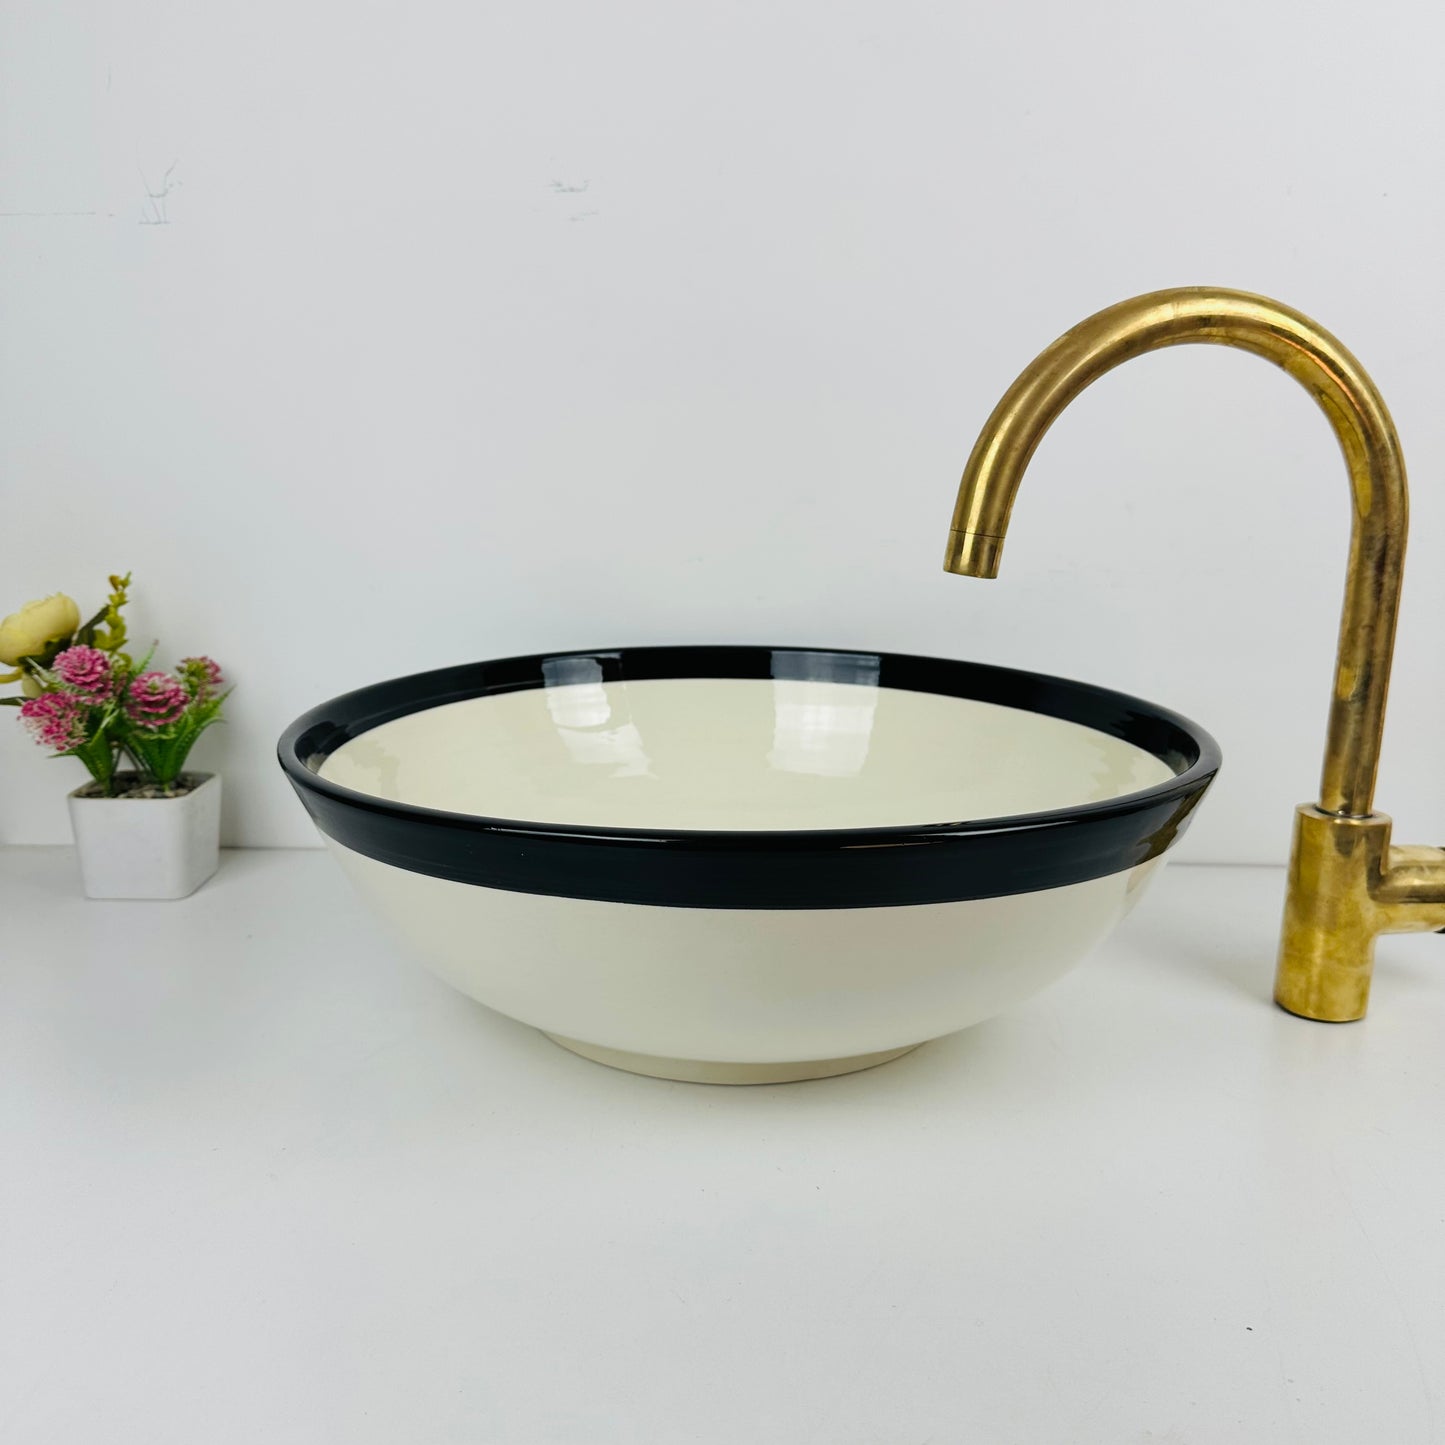 Round Elegance: Handcrafted Ceramic Sink with Black Top Finish